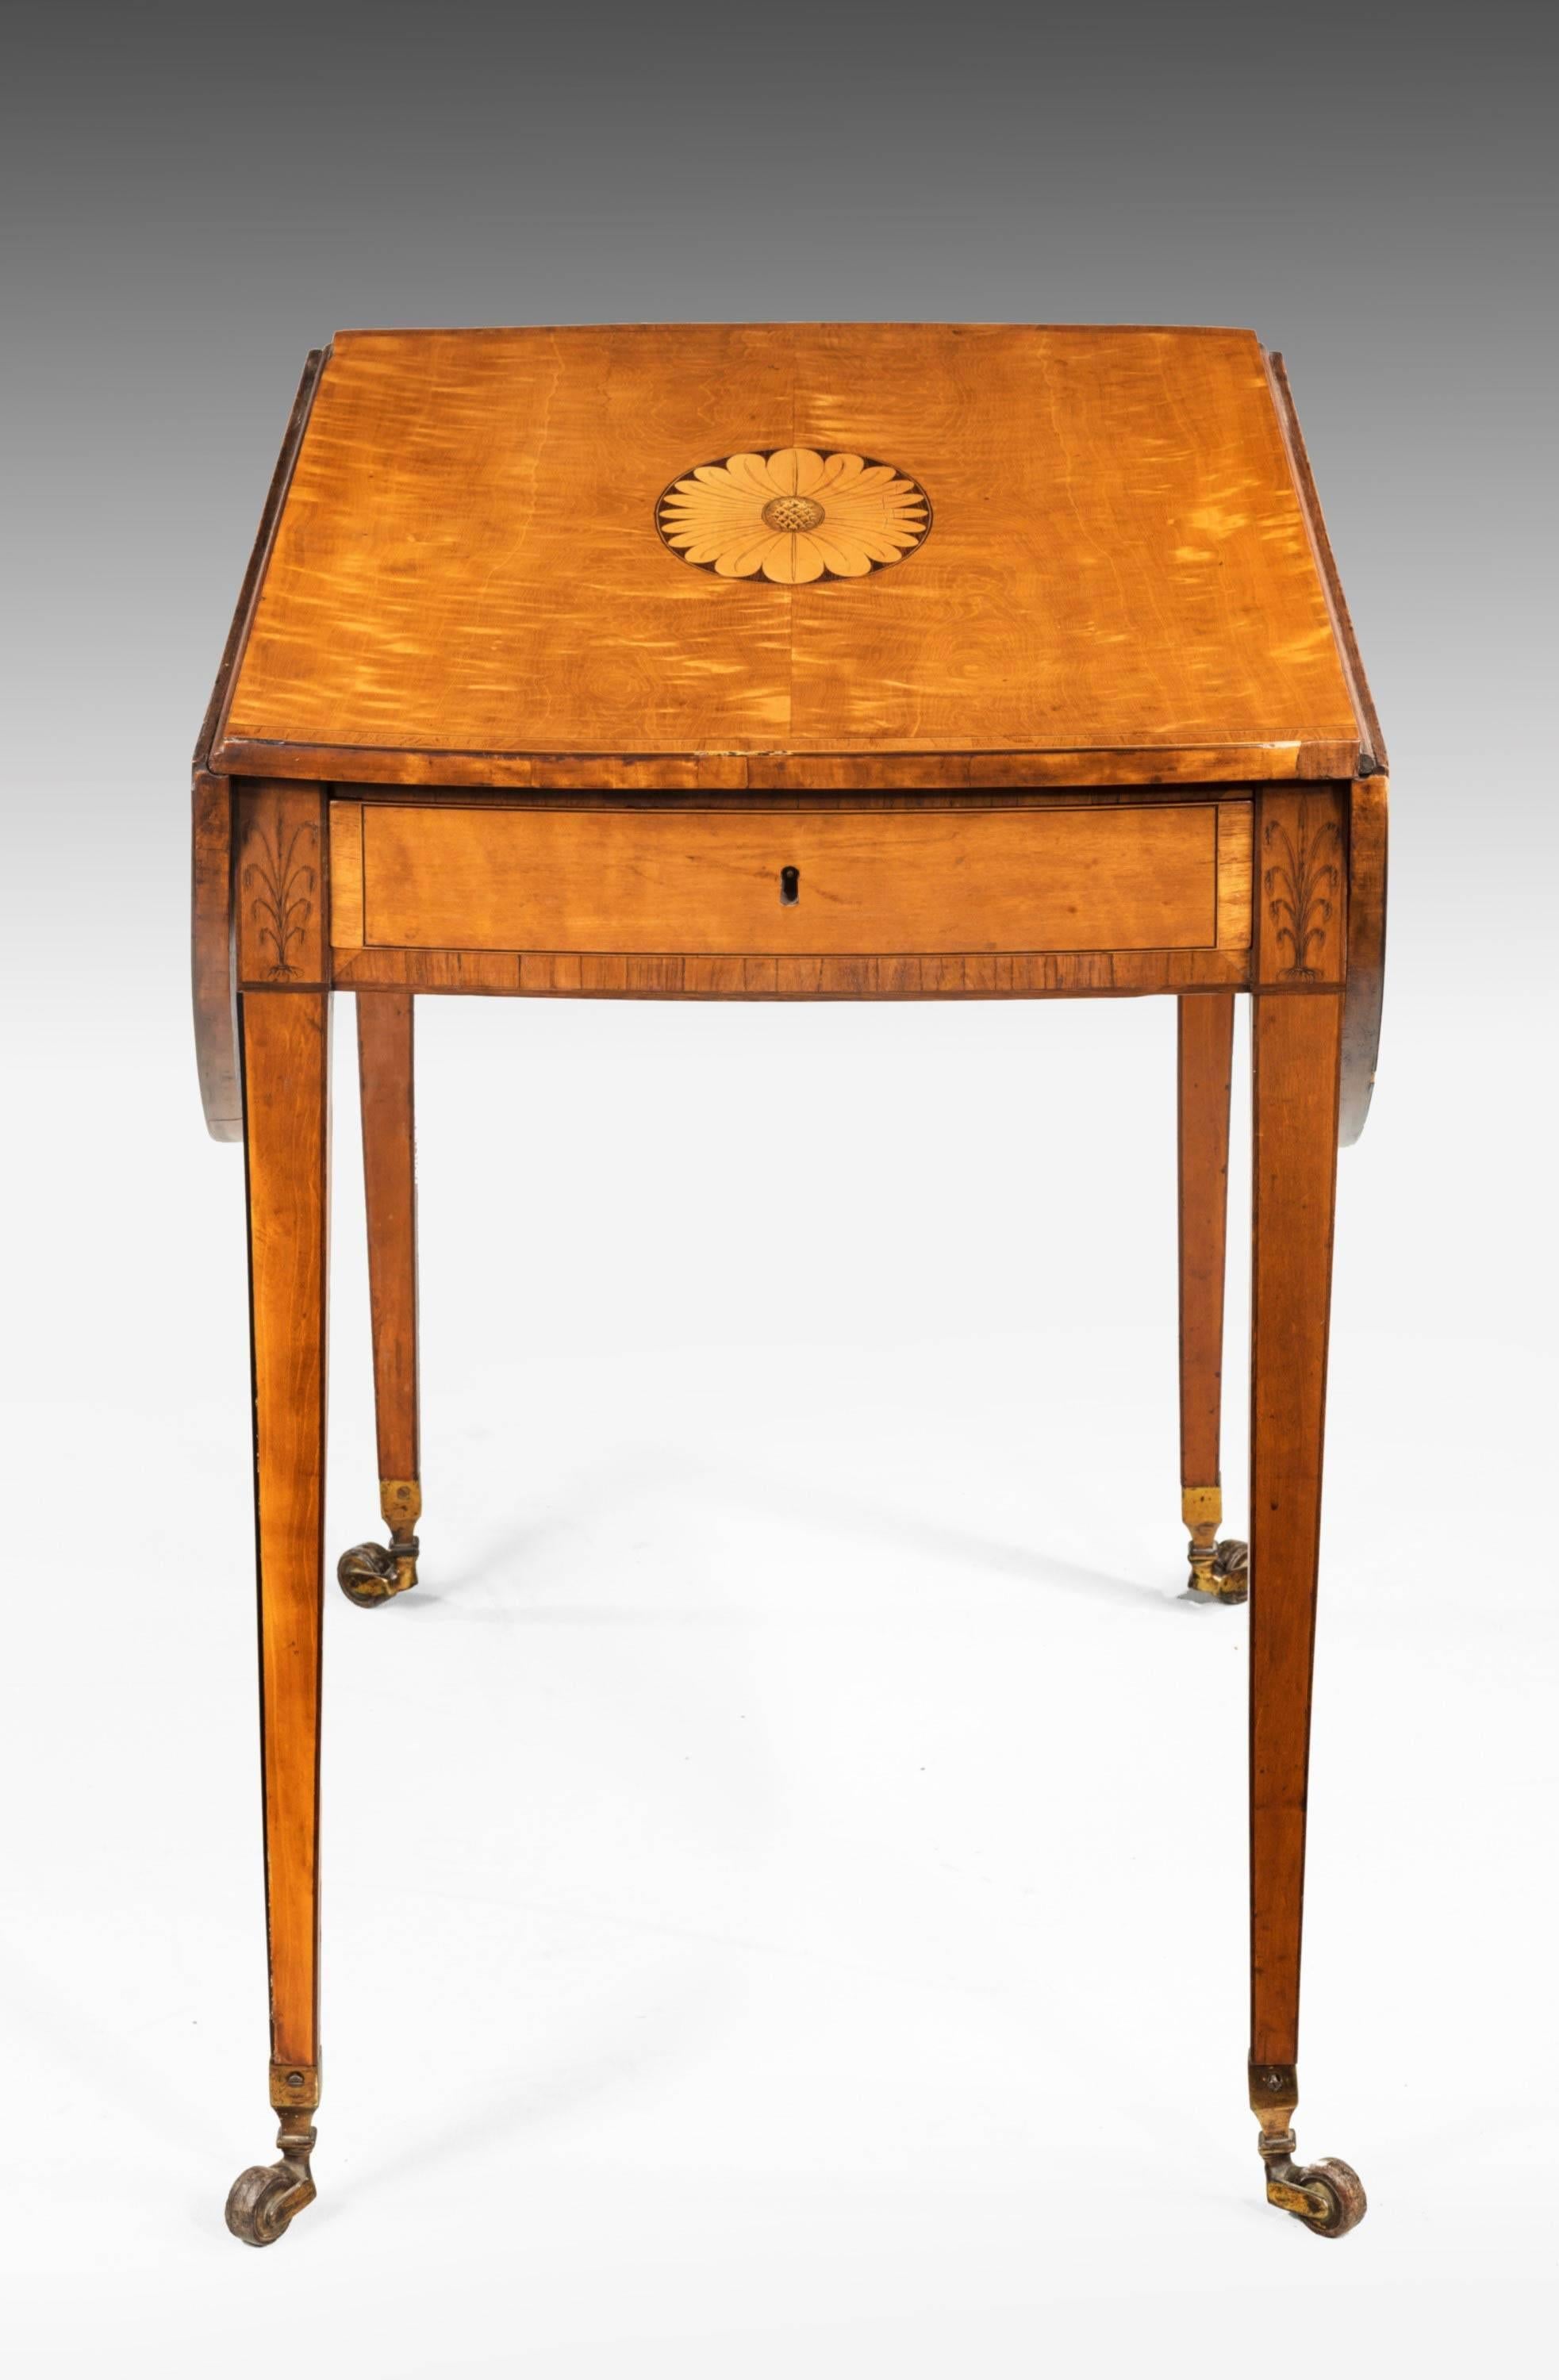 A fine quality late 18th century satinwood Pembroke table of oval form. The centre with large inlay contrasting timbers. Beautifully figured veneers in the oval construction. Tapering square supports with ebony edge inlay.

Width when open 40.50